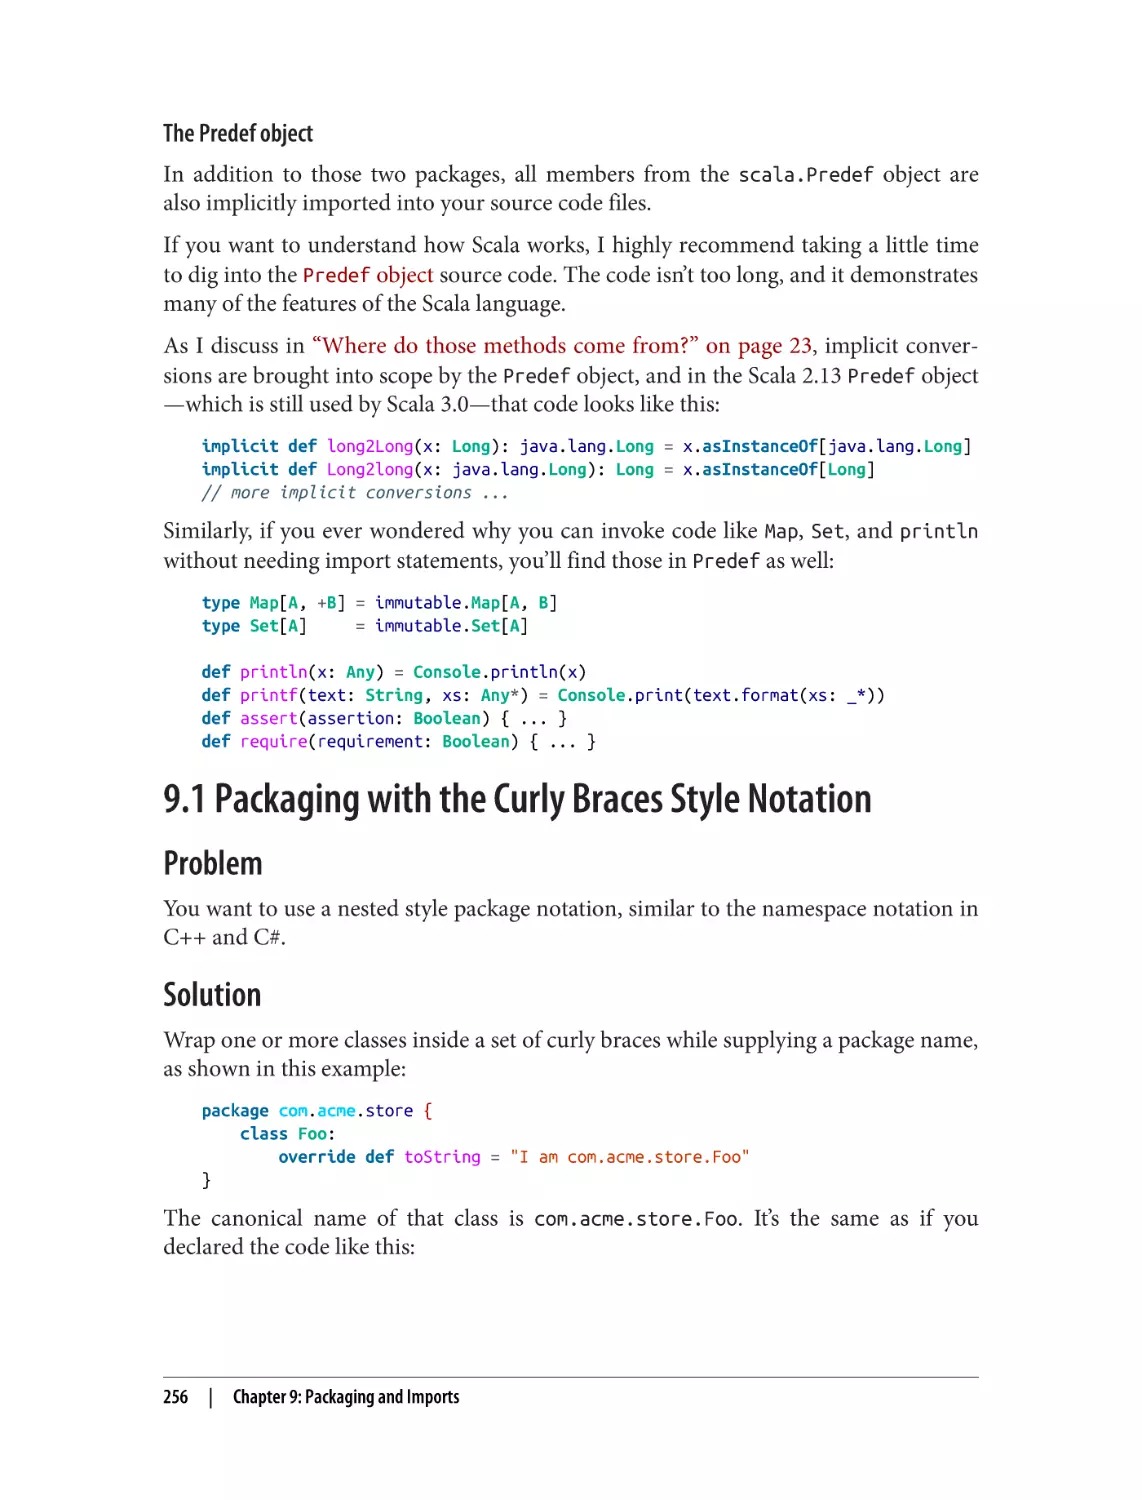 9.1 Packaging with the Curly Braces Style Notation
Problem
Solution